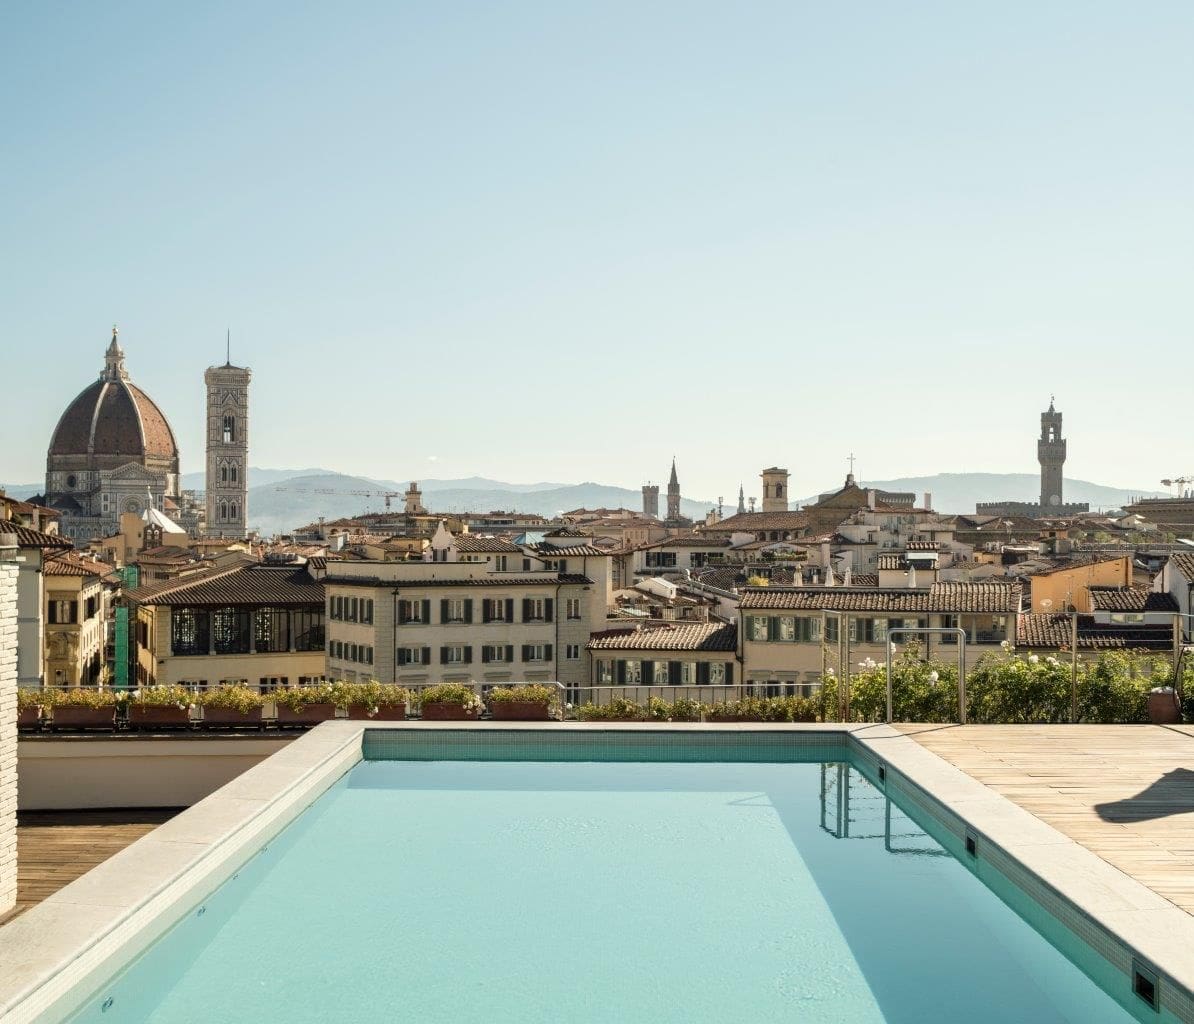 The lovely pool at Grand Hotel Minerva, with a view of the Duomo.